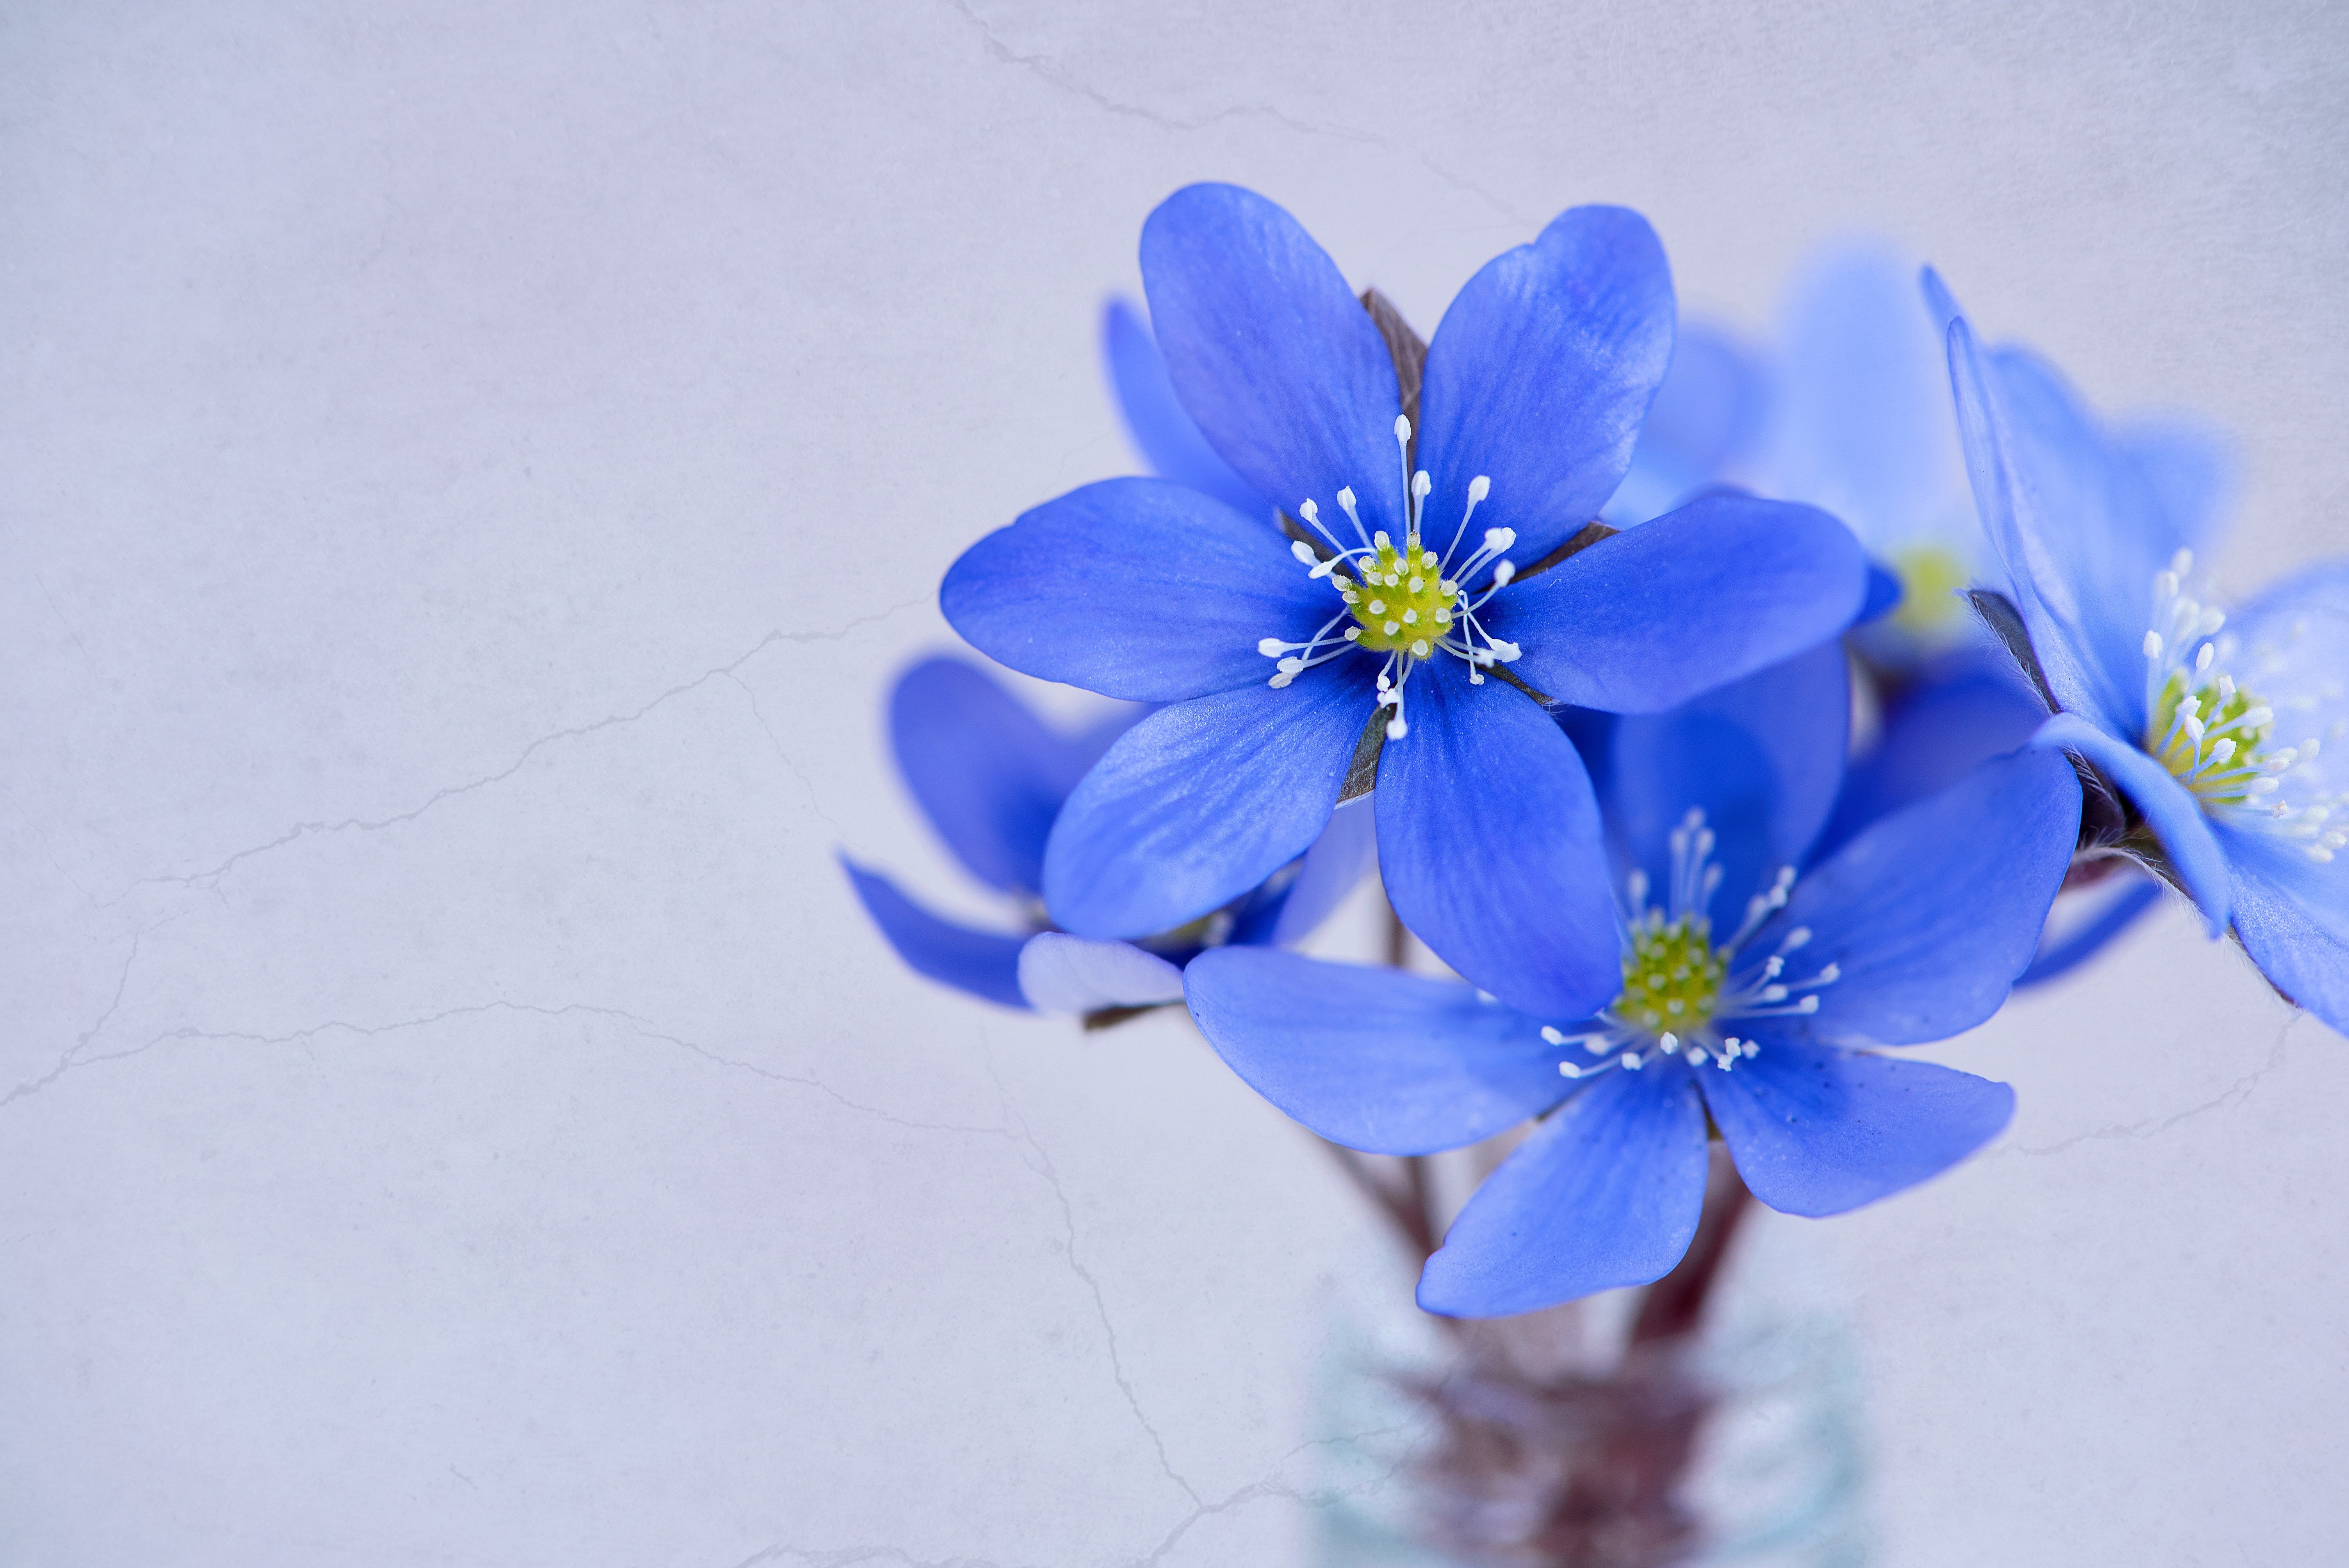 Free Image, blossom, petal, flora, blue flower, wildflower, flowers, close up, petals, hepatica, early bloomer, spring flower, macro photography, flowering plant, borage family, computer wallpaper 6016x4016